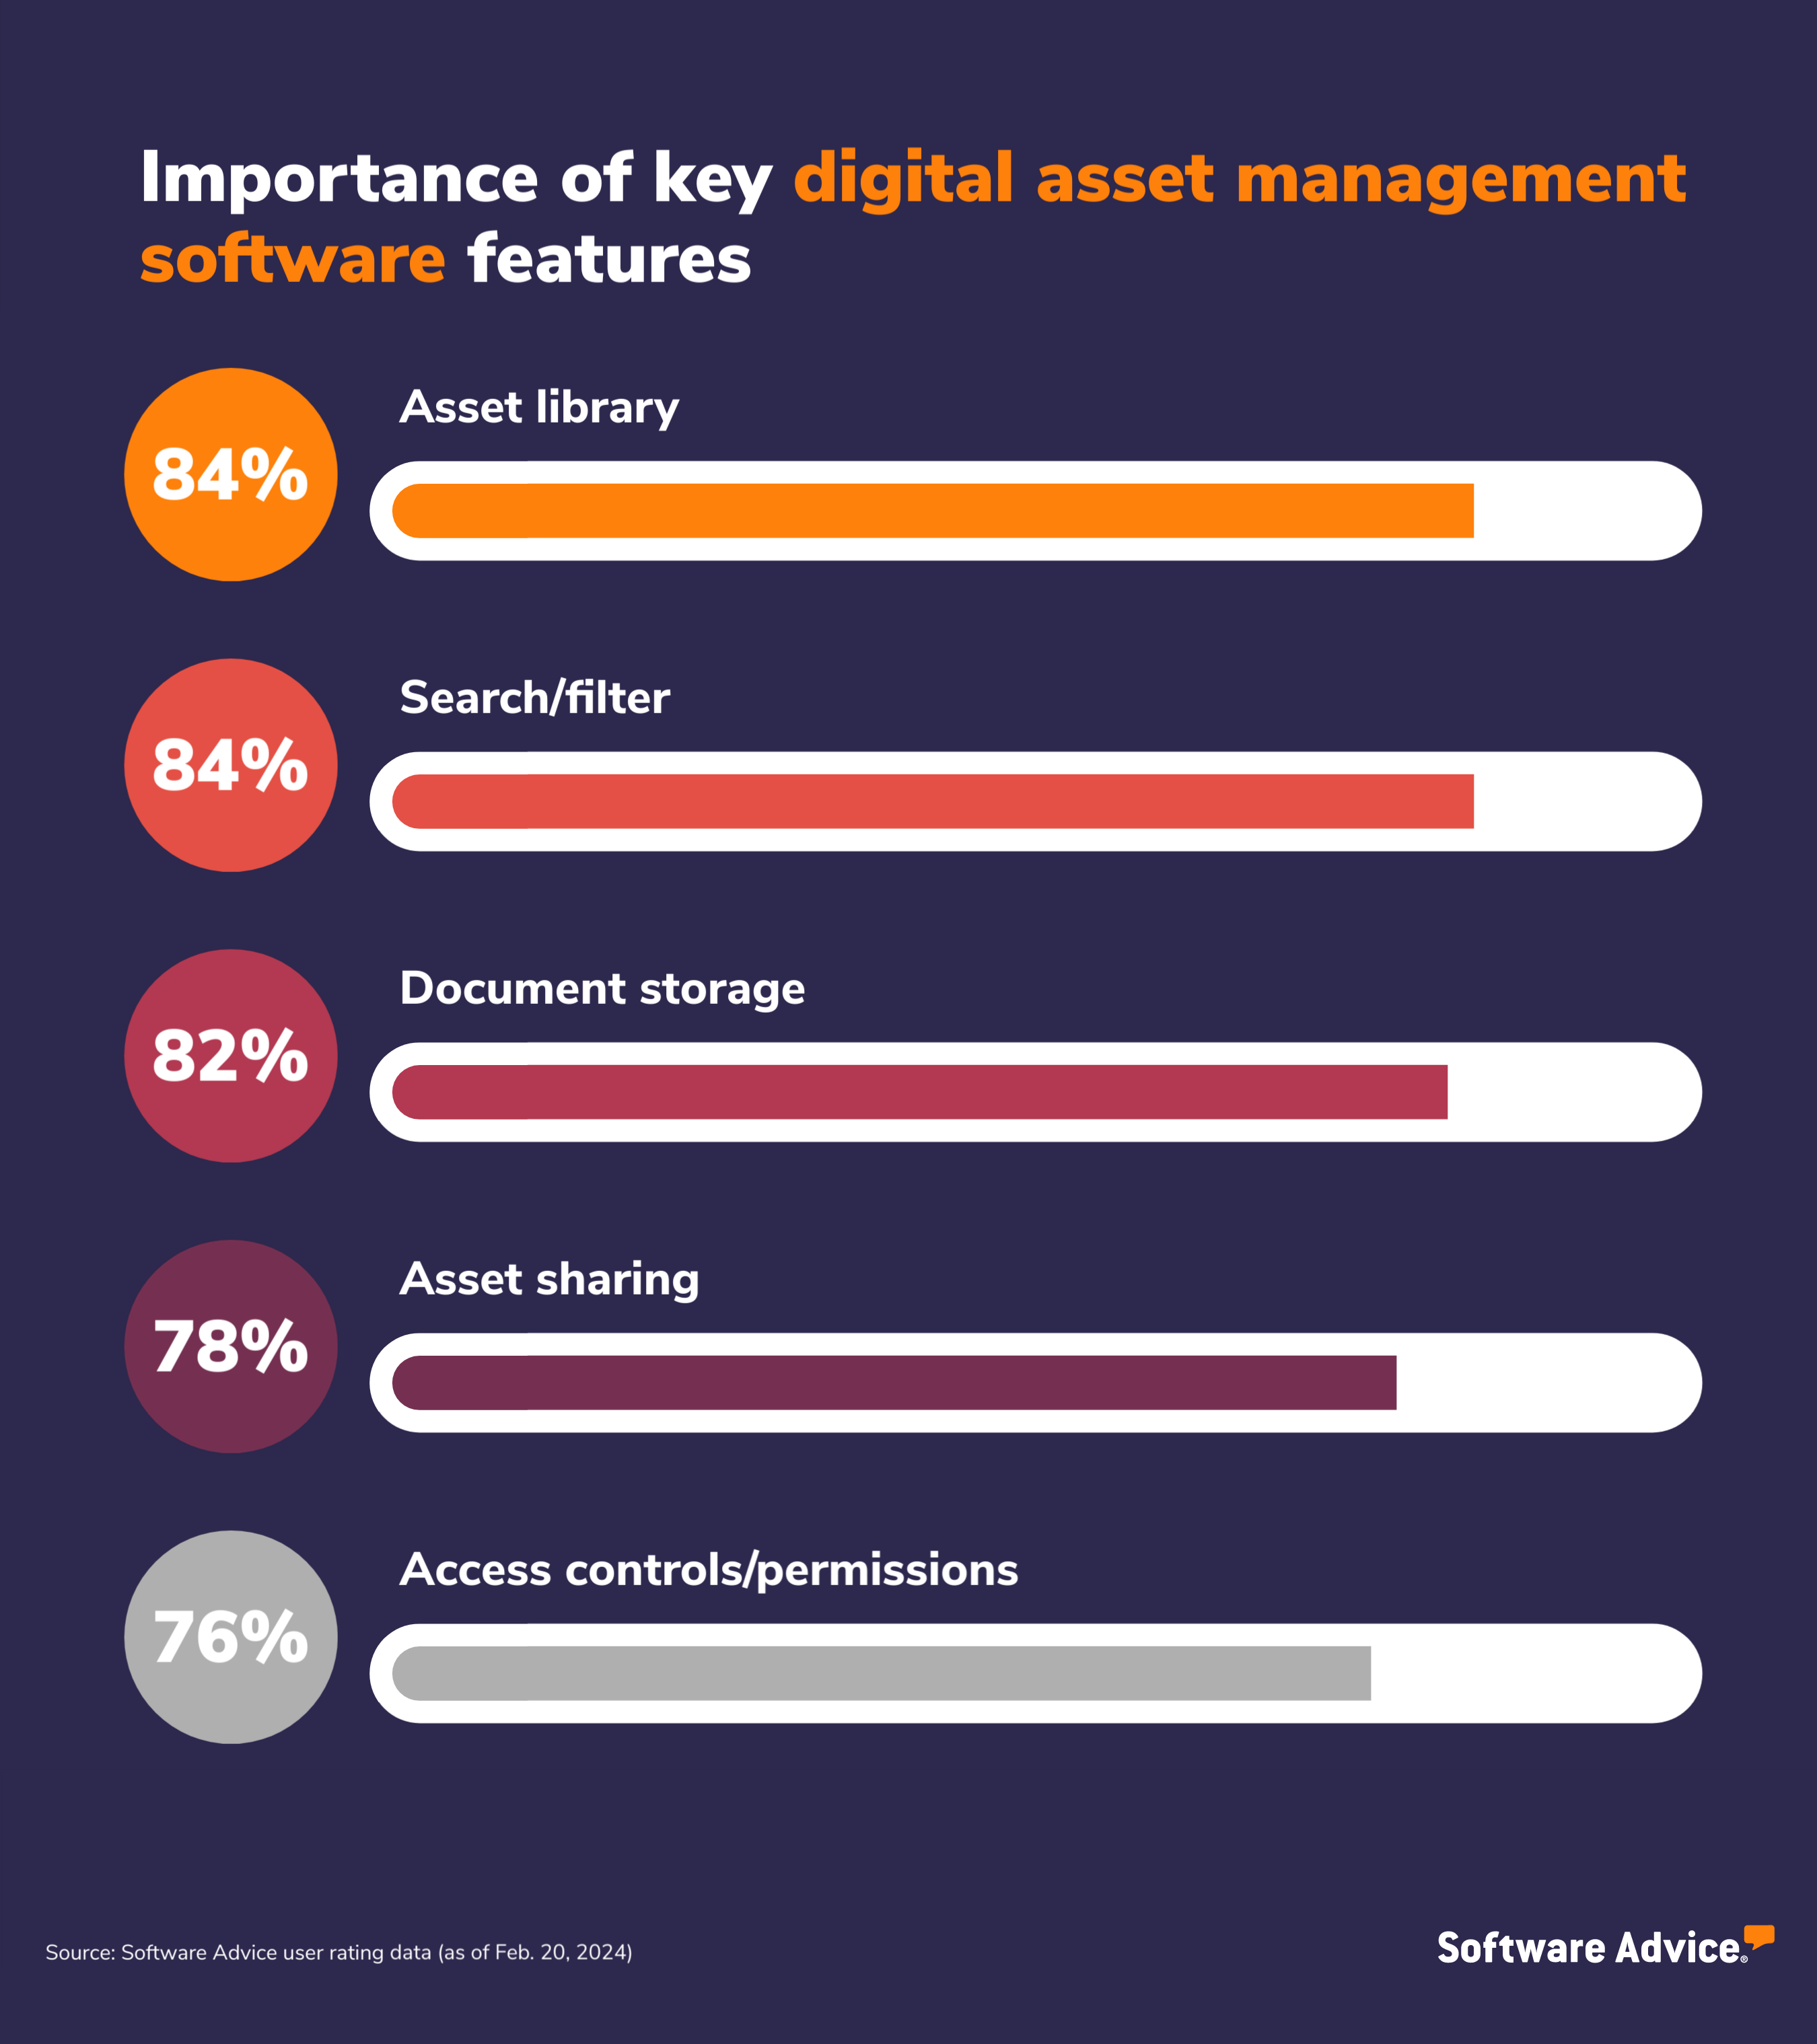 Graphic showing the importance of key digital asset management software features: 84% asset library; 84% search/filter; 82% document storage; 78% asset sharing; 76% access controls/permissions.